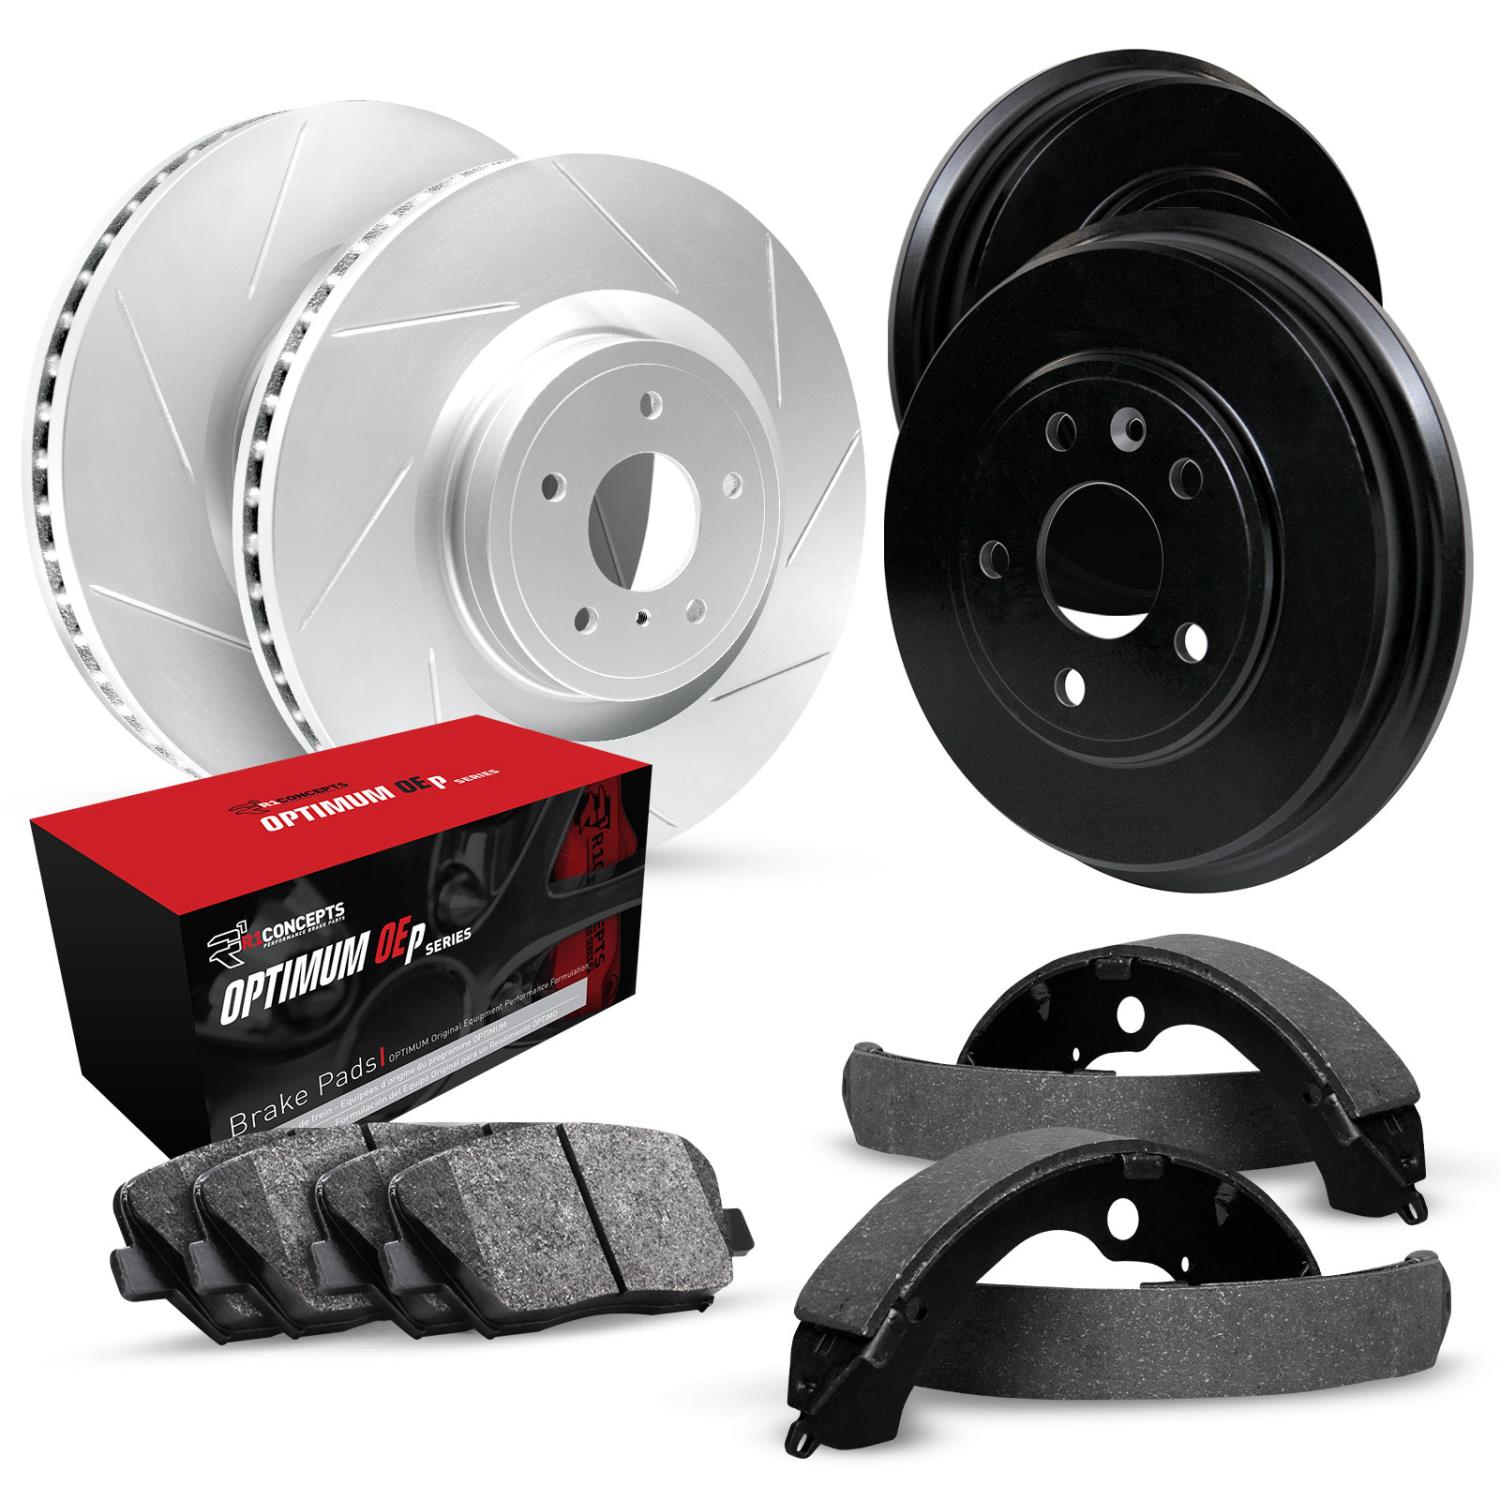 GEO-Carbon Slotted Brake Rotor & Drum Set w/Optimum OE Pads & Shoes, 1992-2001 GM, Position: Front & Rear